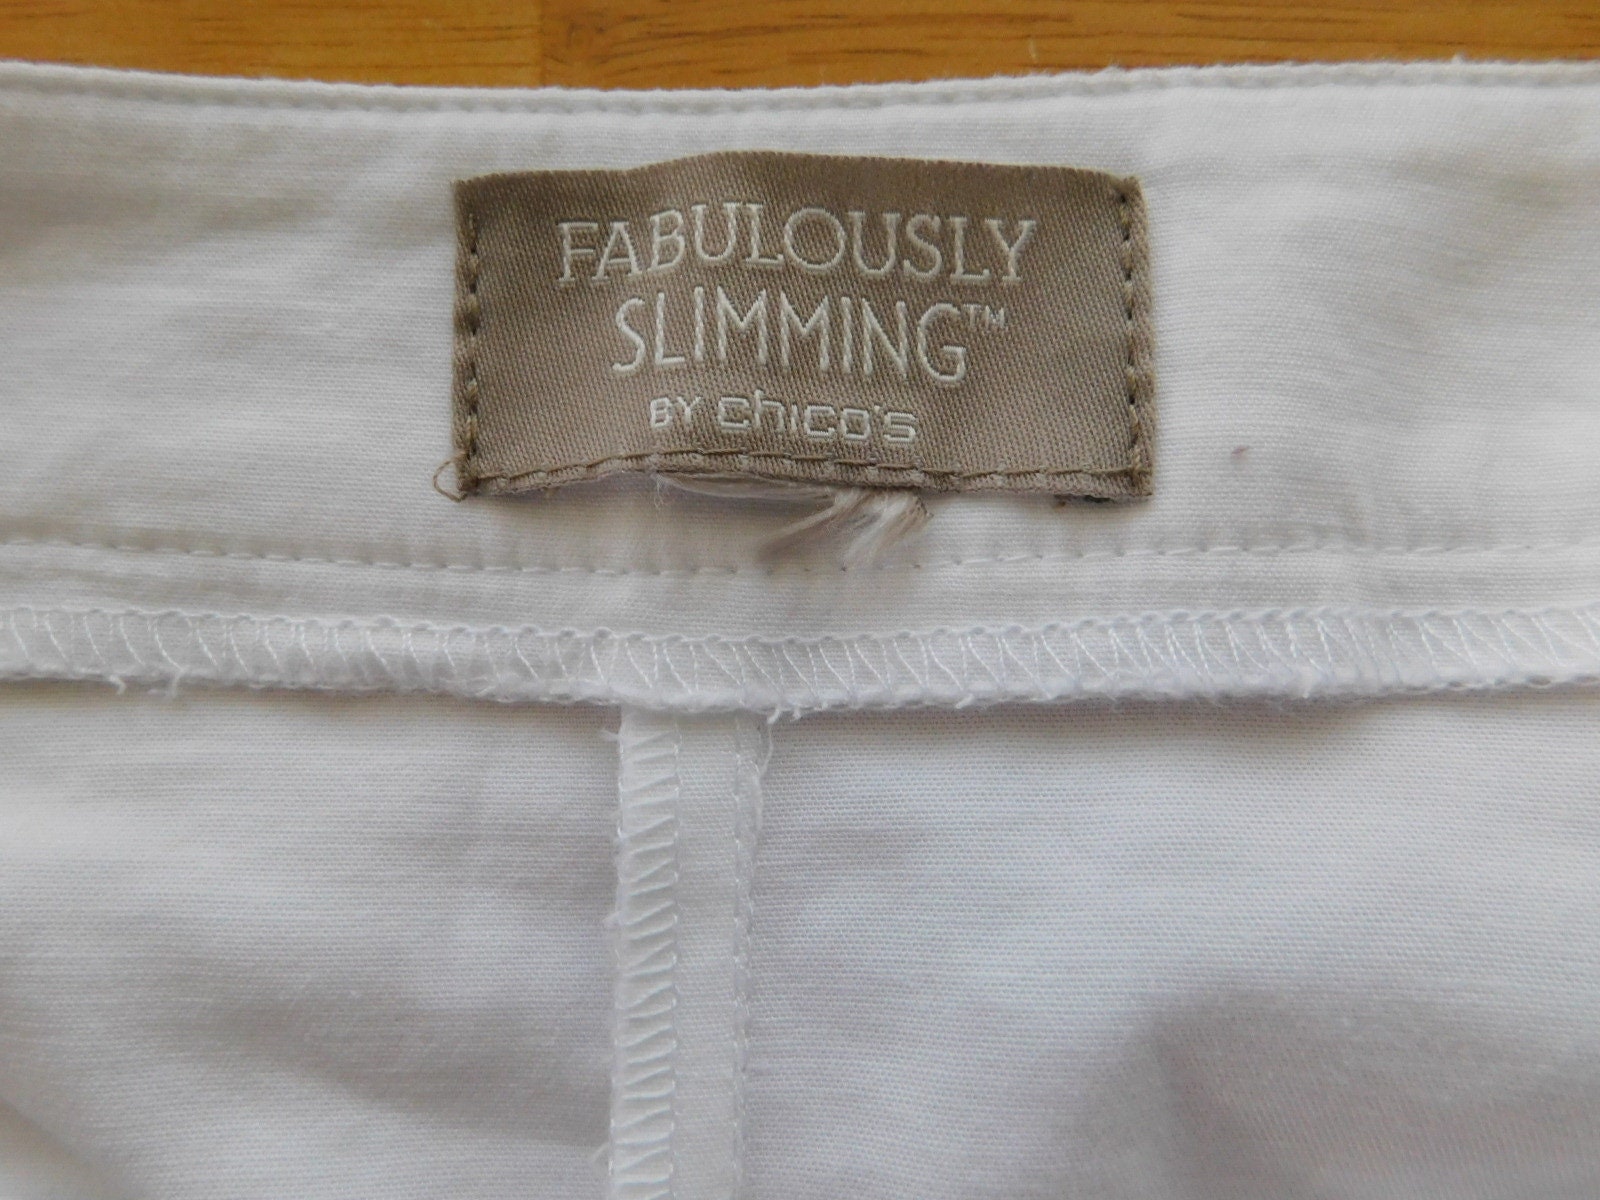 Buy Chico's Waist 40 roundfamously Slimming White Pants/stretch